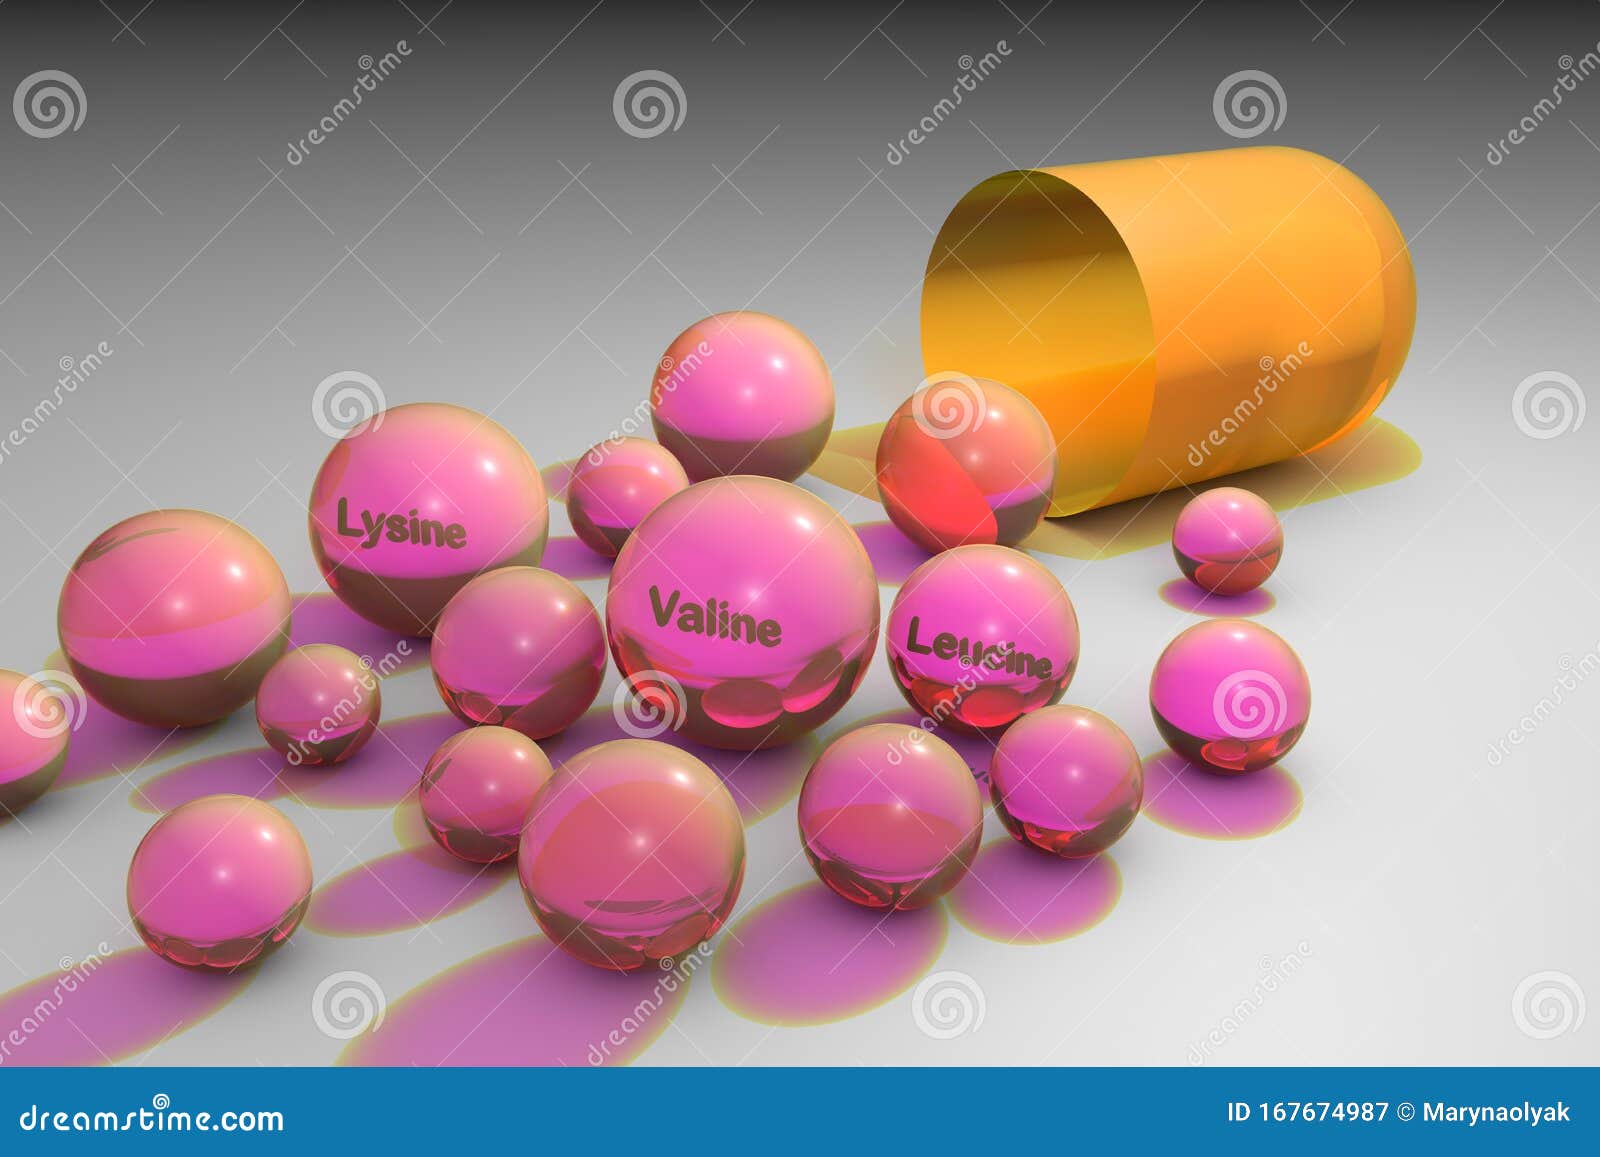 opened capsule with valine, lysine and leucine drops. they are essential amino acids used in the biosynthesis of